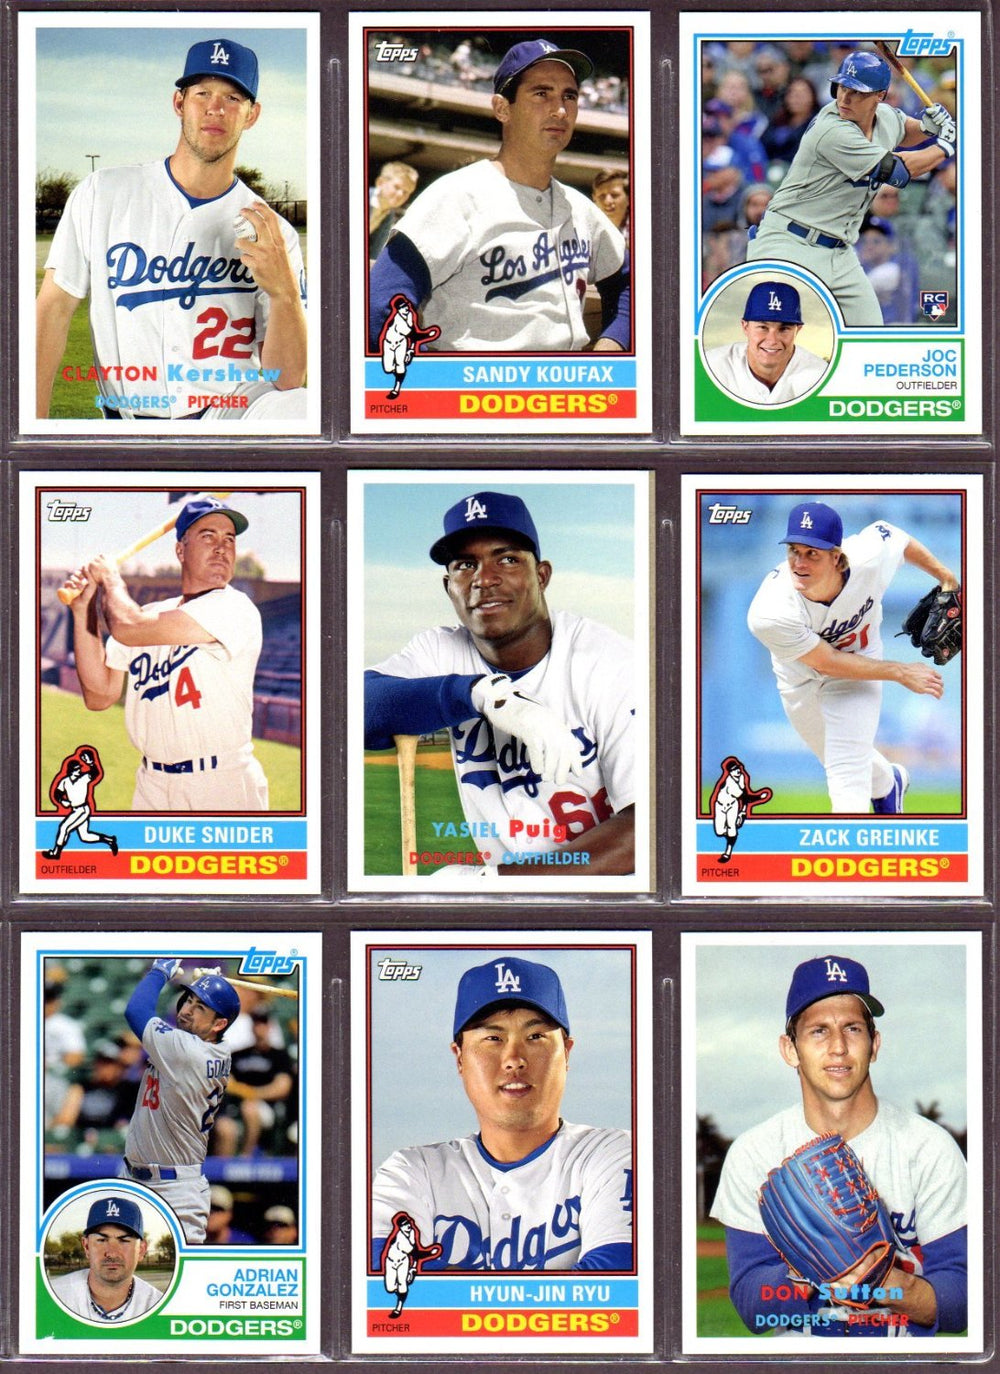 Los Angeles Dodgers 2015 Topps ARCHIVES Series Team Set with Sandy Koufax and Clayton Kershaw Plus